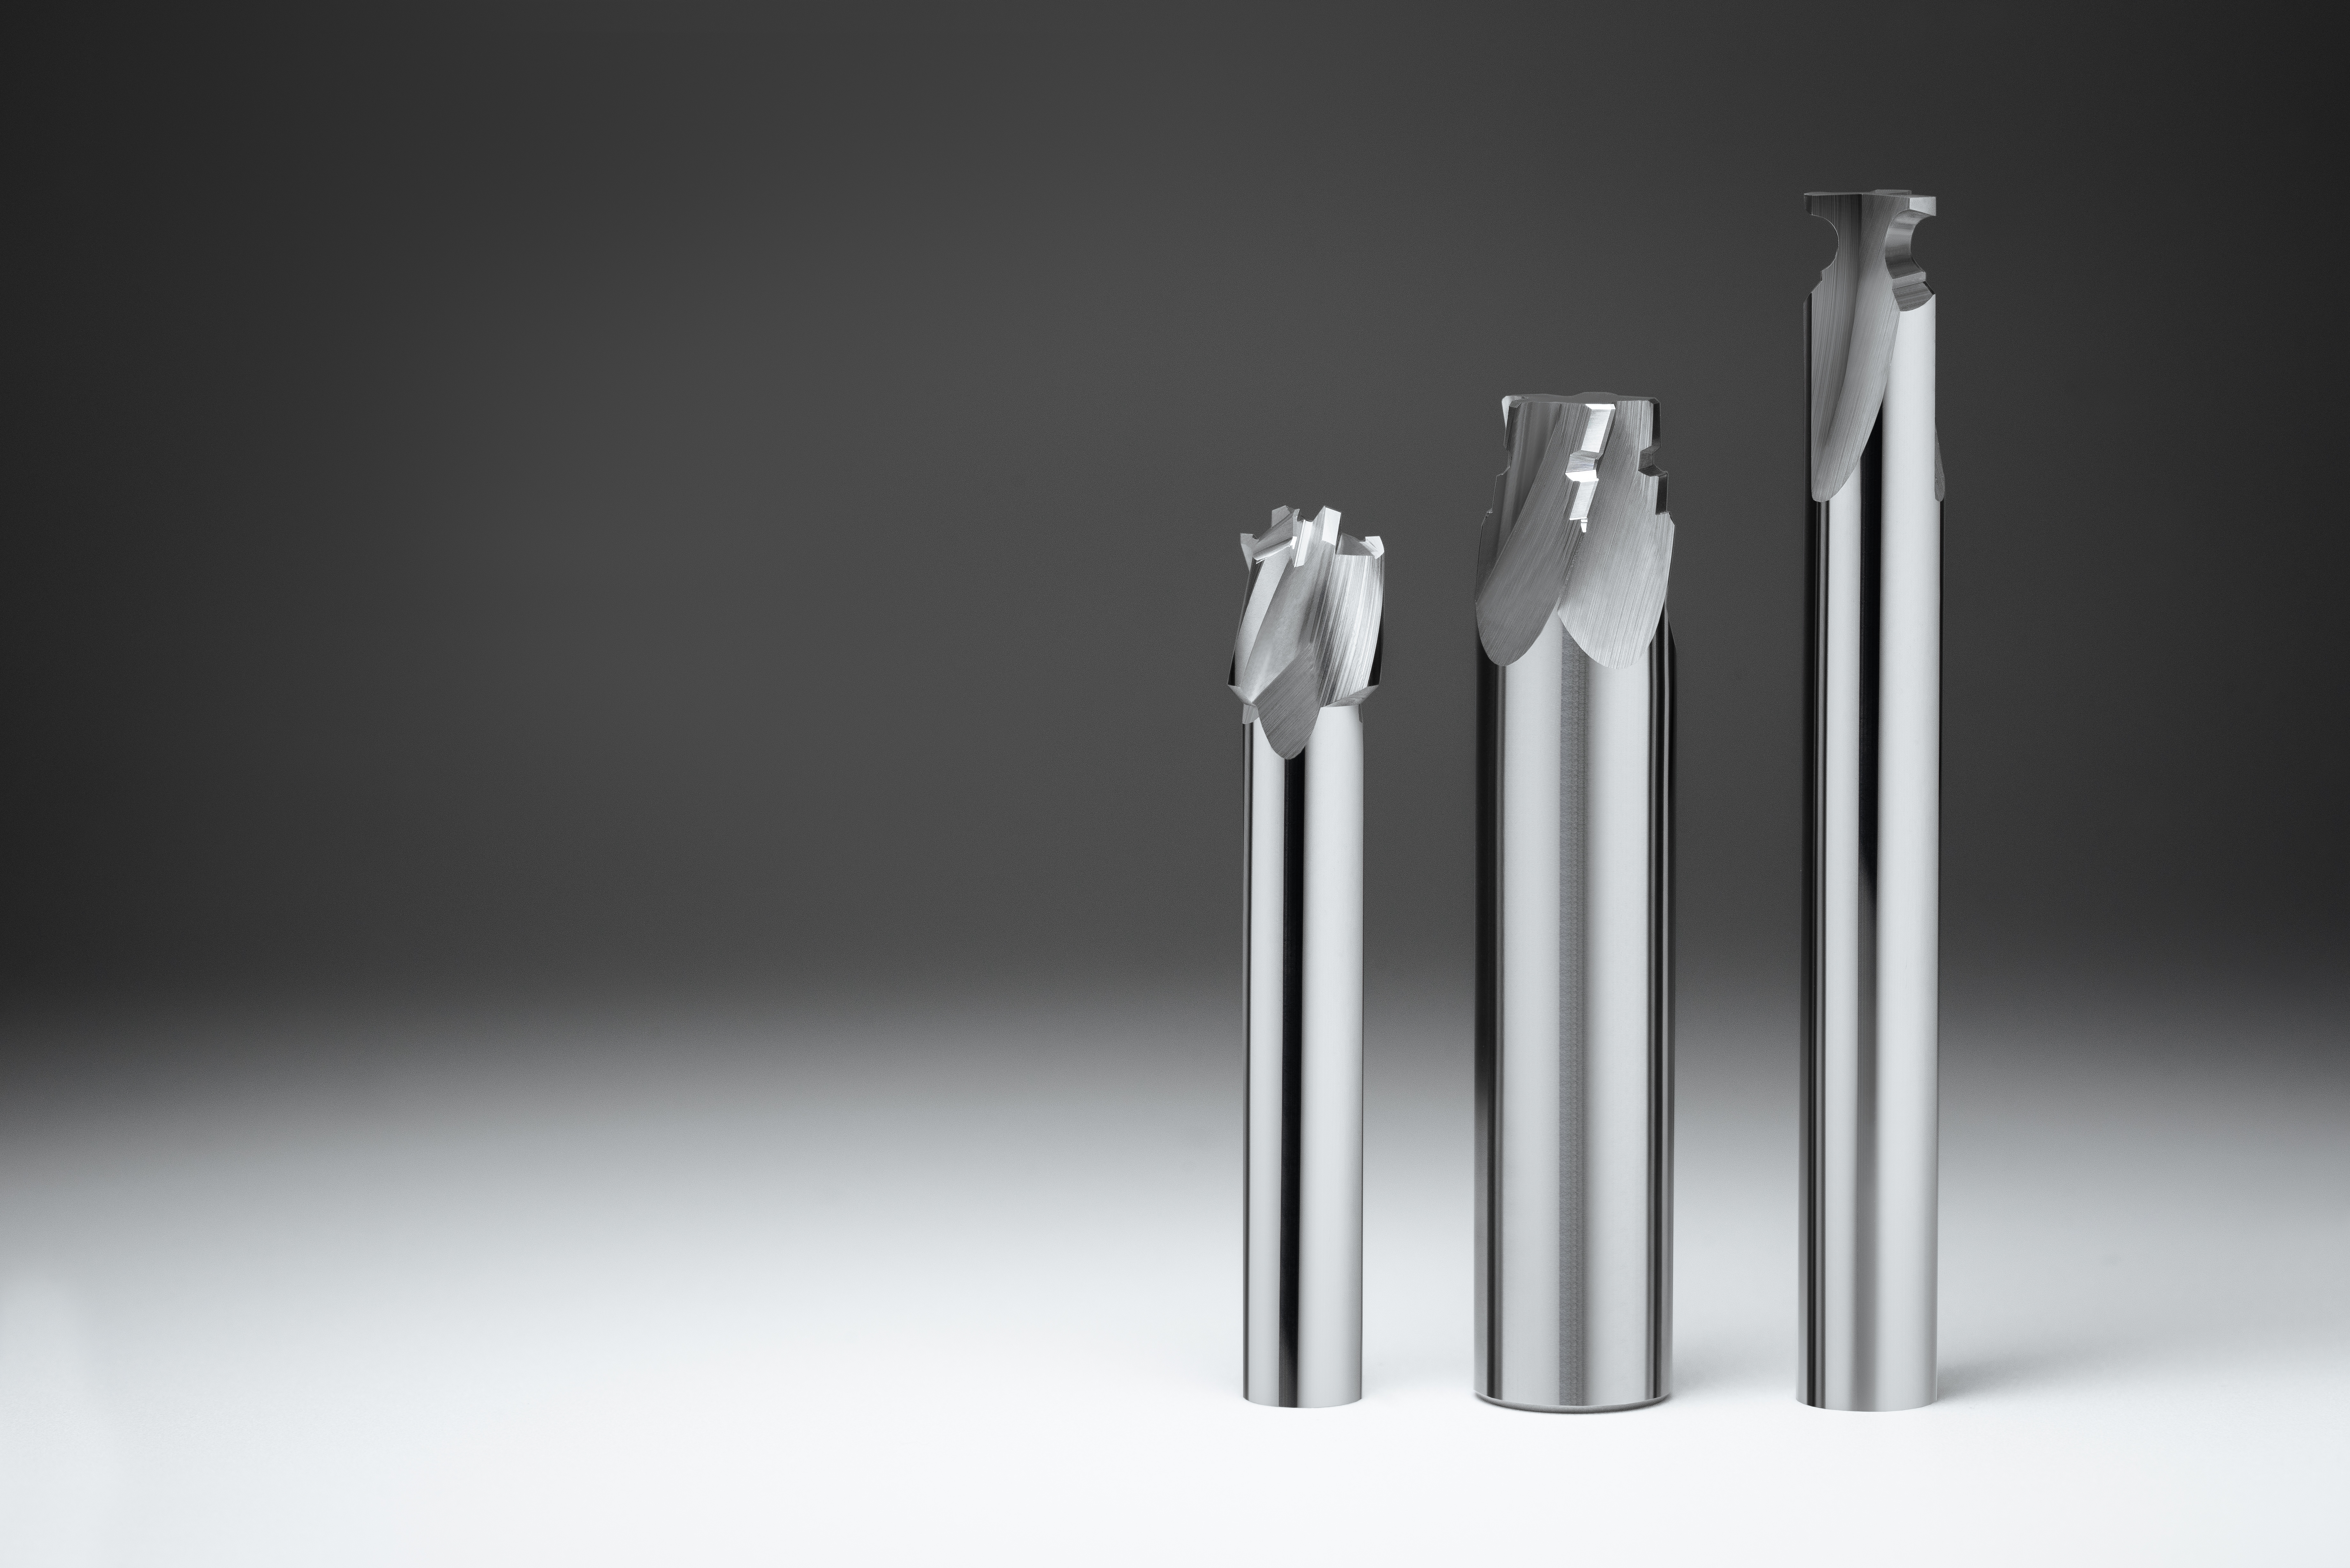 Precision metal cutting tools of different sizes and shapes, showcasing the variety and complexity of specialised machining equipment in high-precision manufacturing industries.